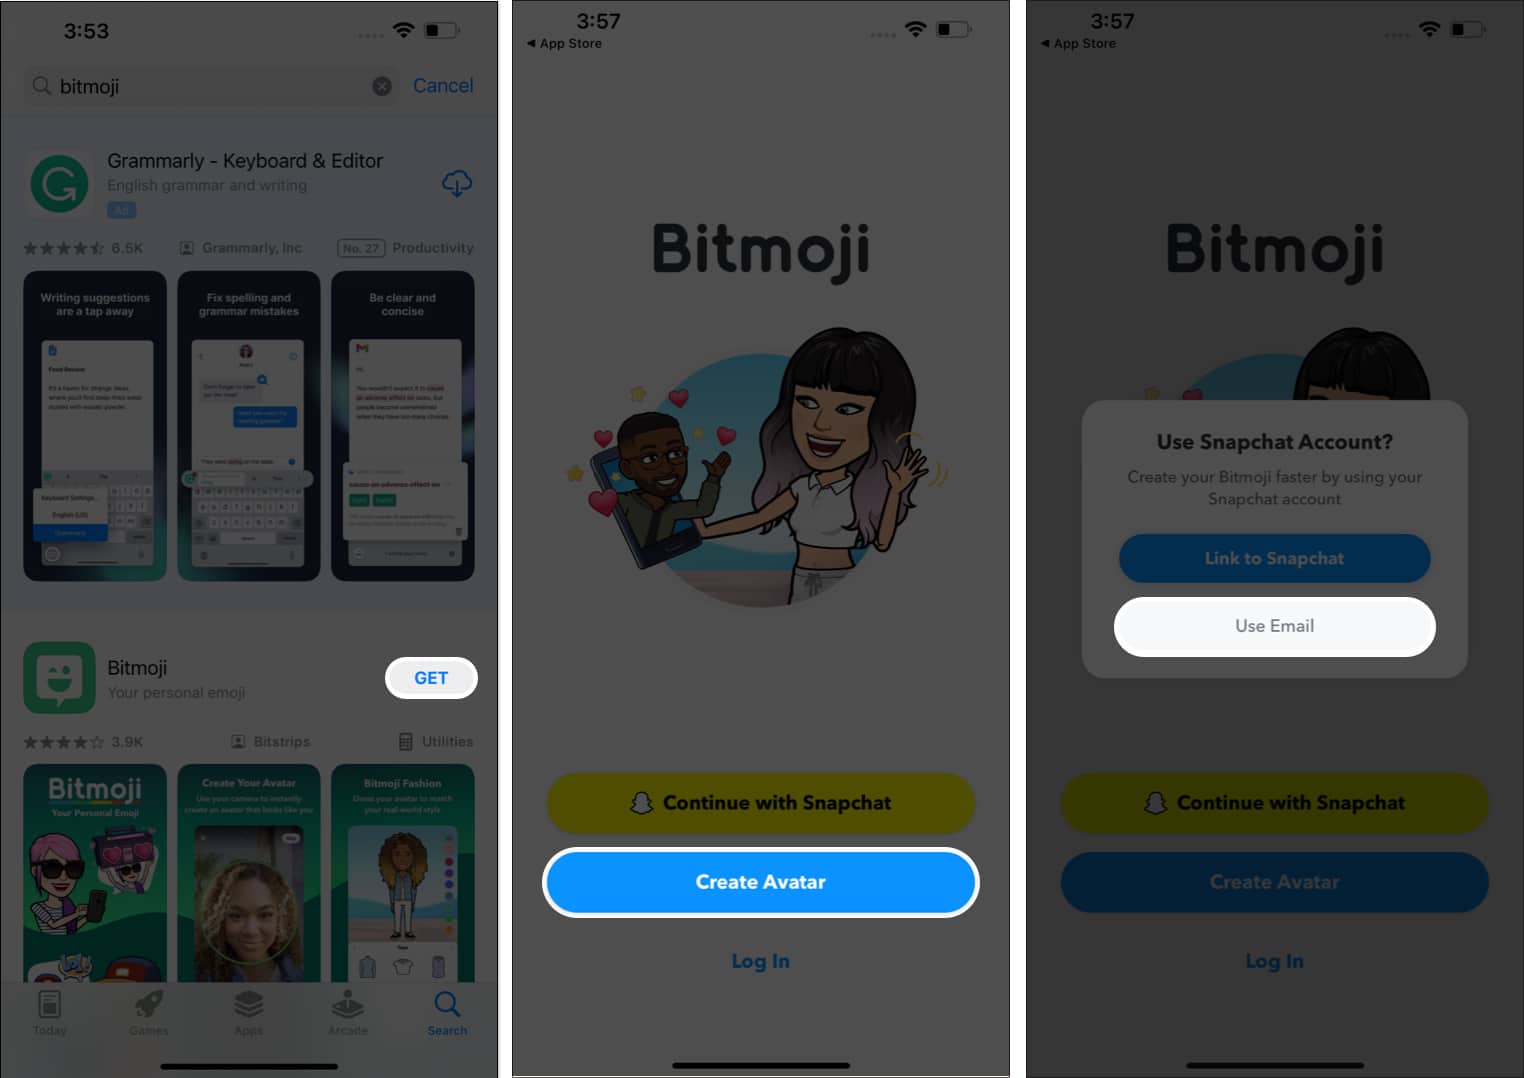 Search and download Bitmoji, select Create Avatar, and tap Use Email